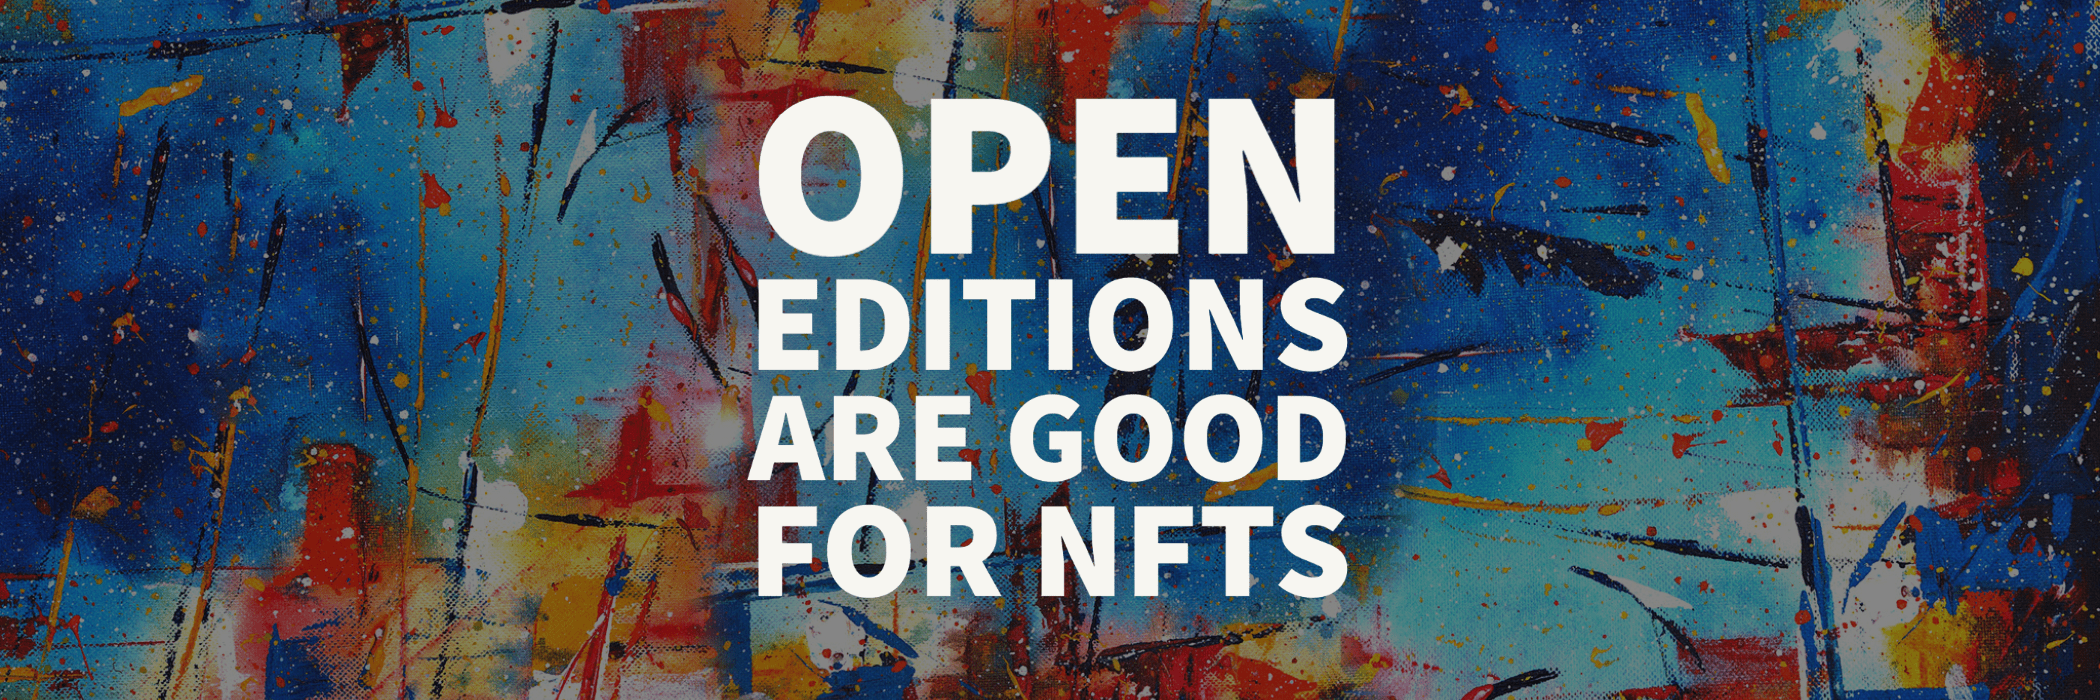 Open Edition Art NFTs are taking over